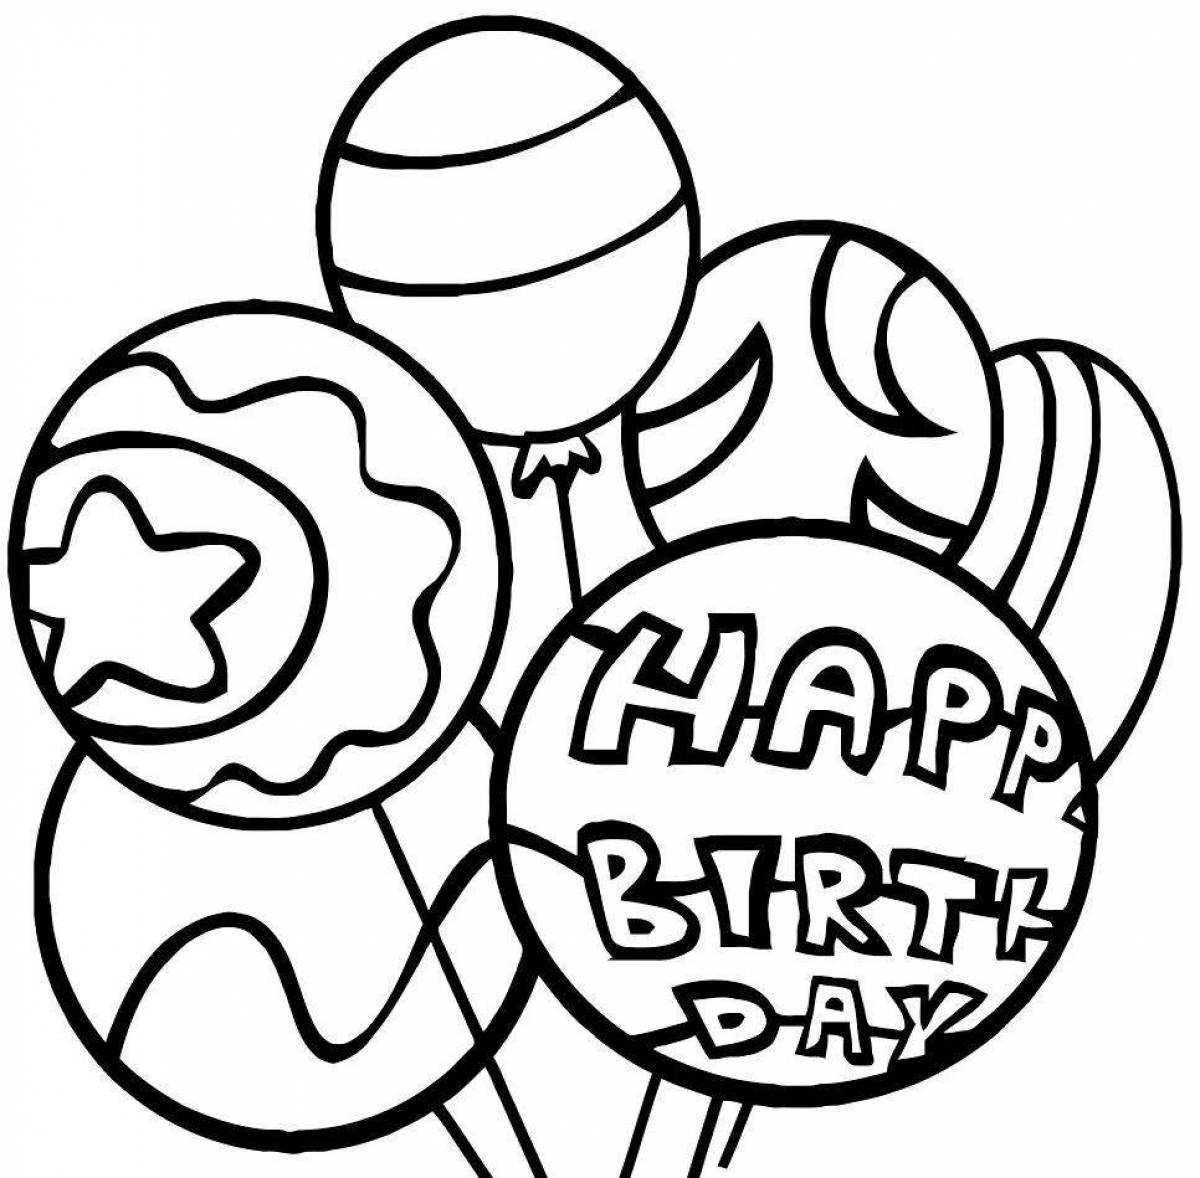 Coloring page fancy happy birthday balloons